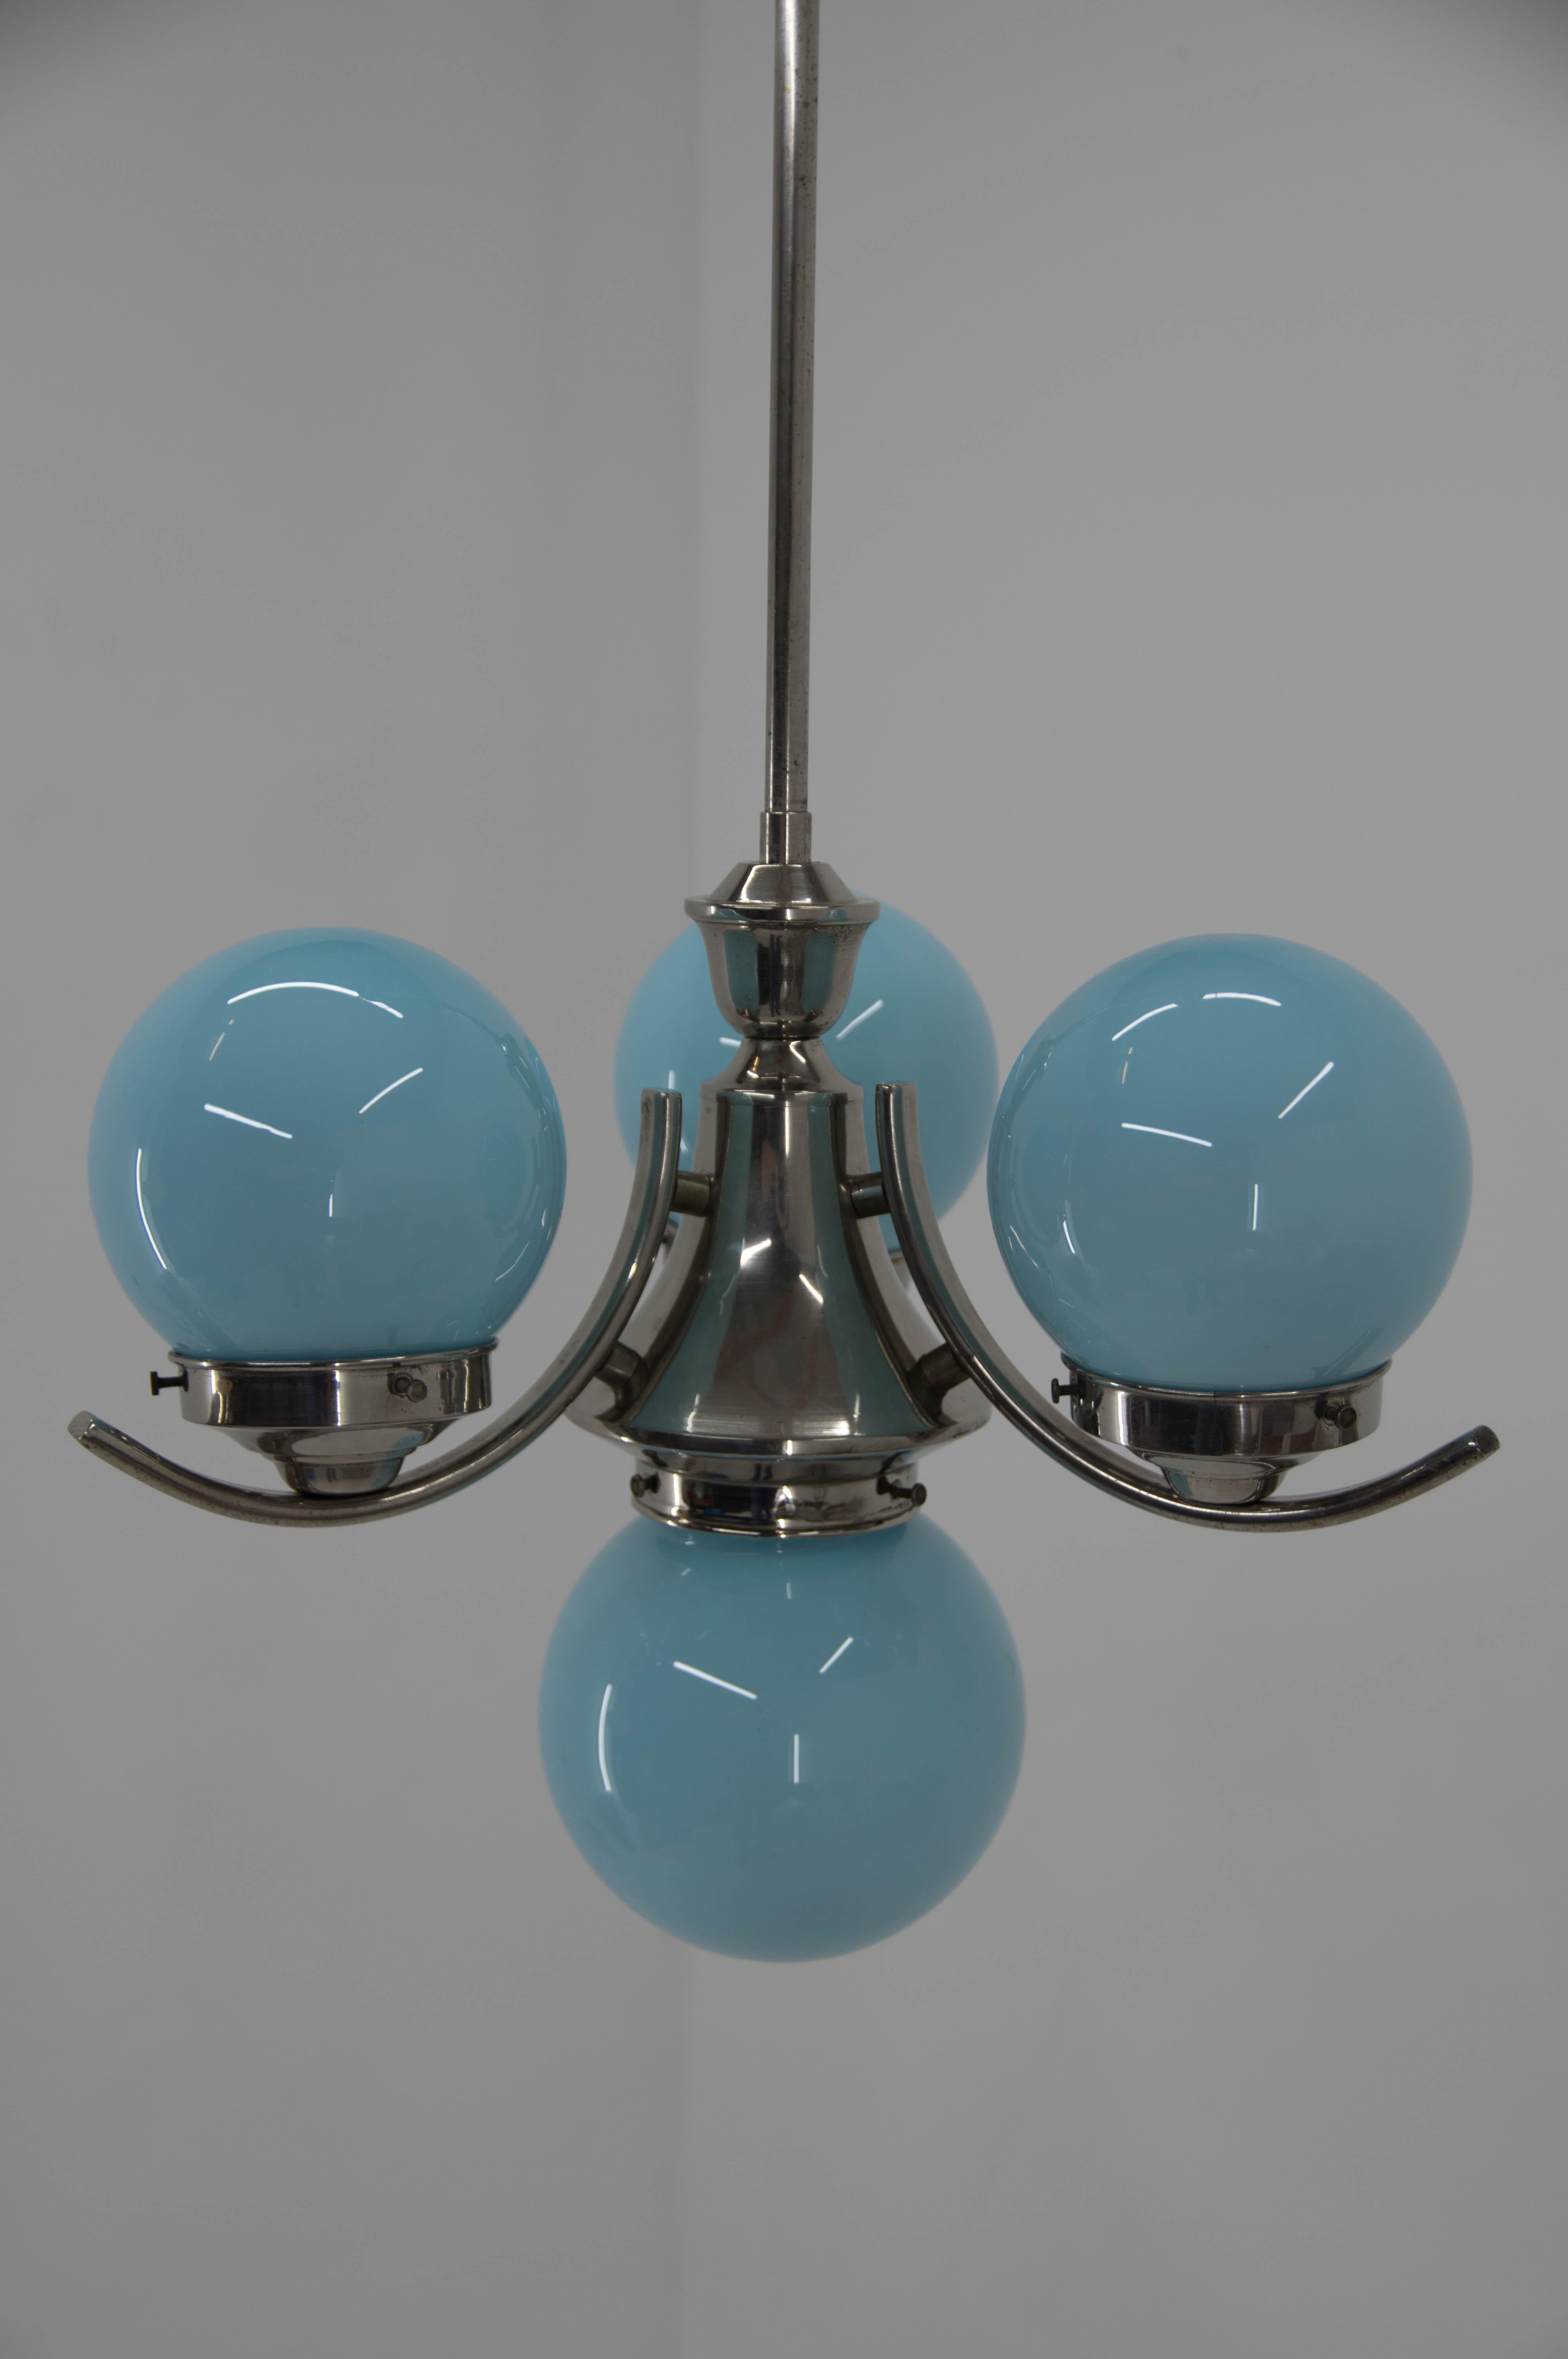 Czech Chrome-Plated Art Deco Chandelier with Blue Shades, 1930s